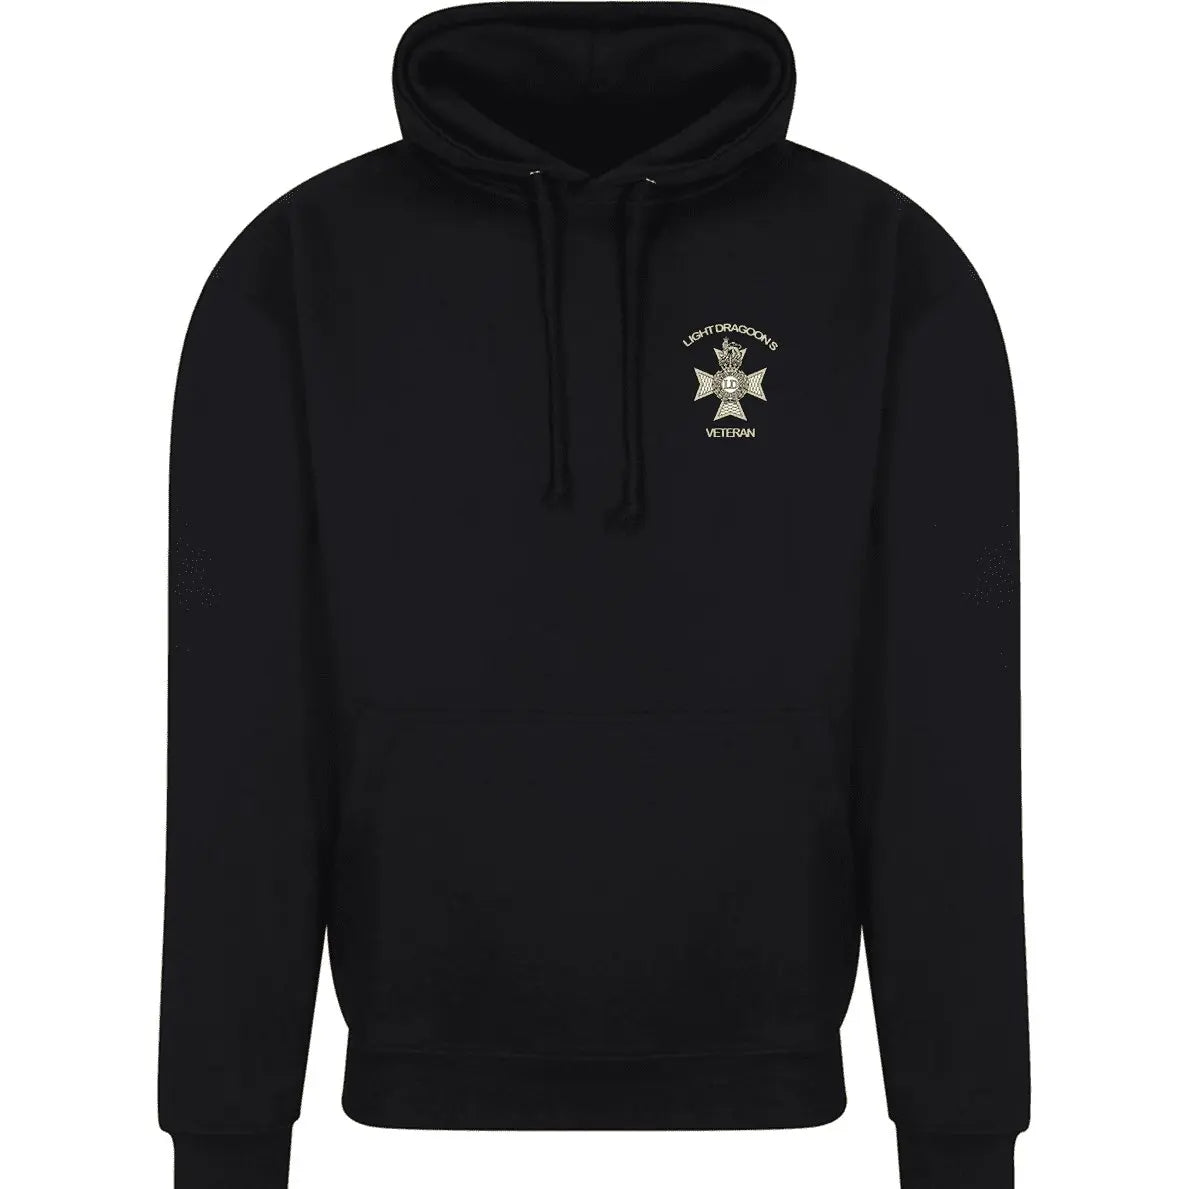 The Light Dragoons Embroidered Hoodie redplume